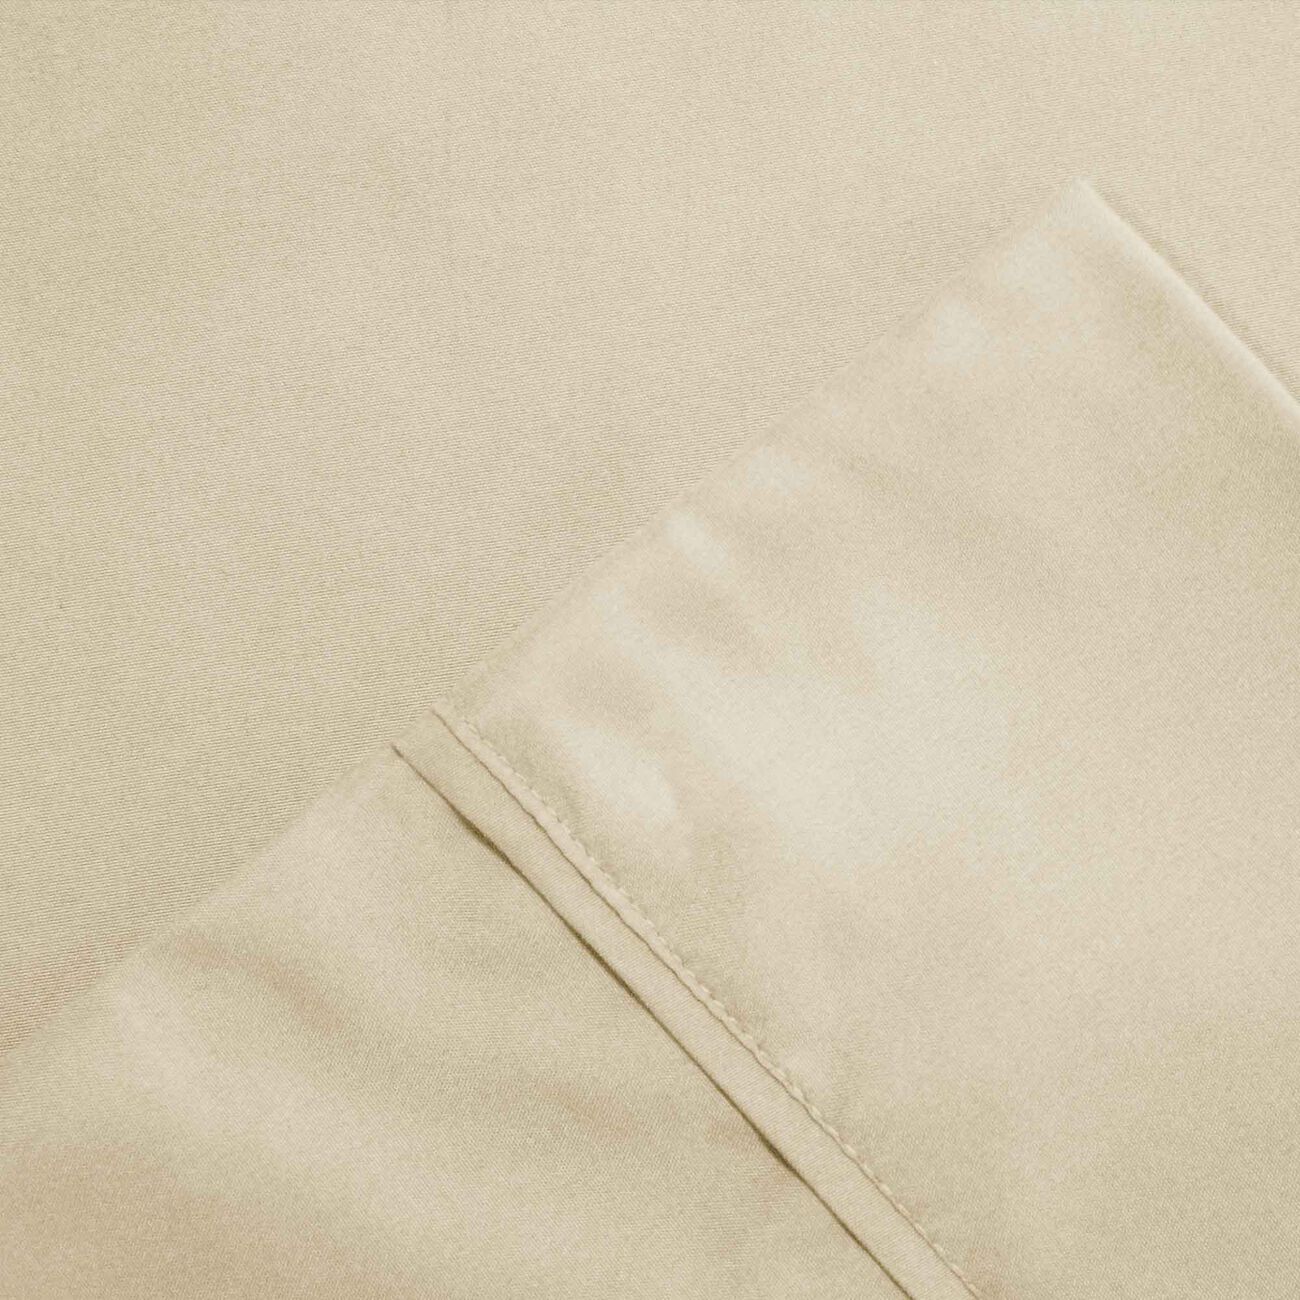 Bezons 4 Piece California King Microfiber Sheet Set with 1800 Thread Count, Cream